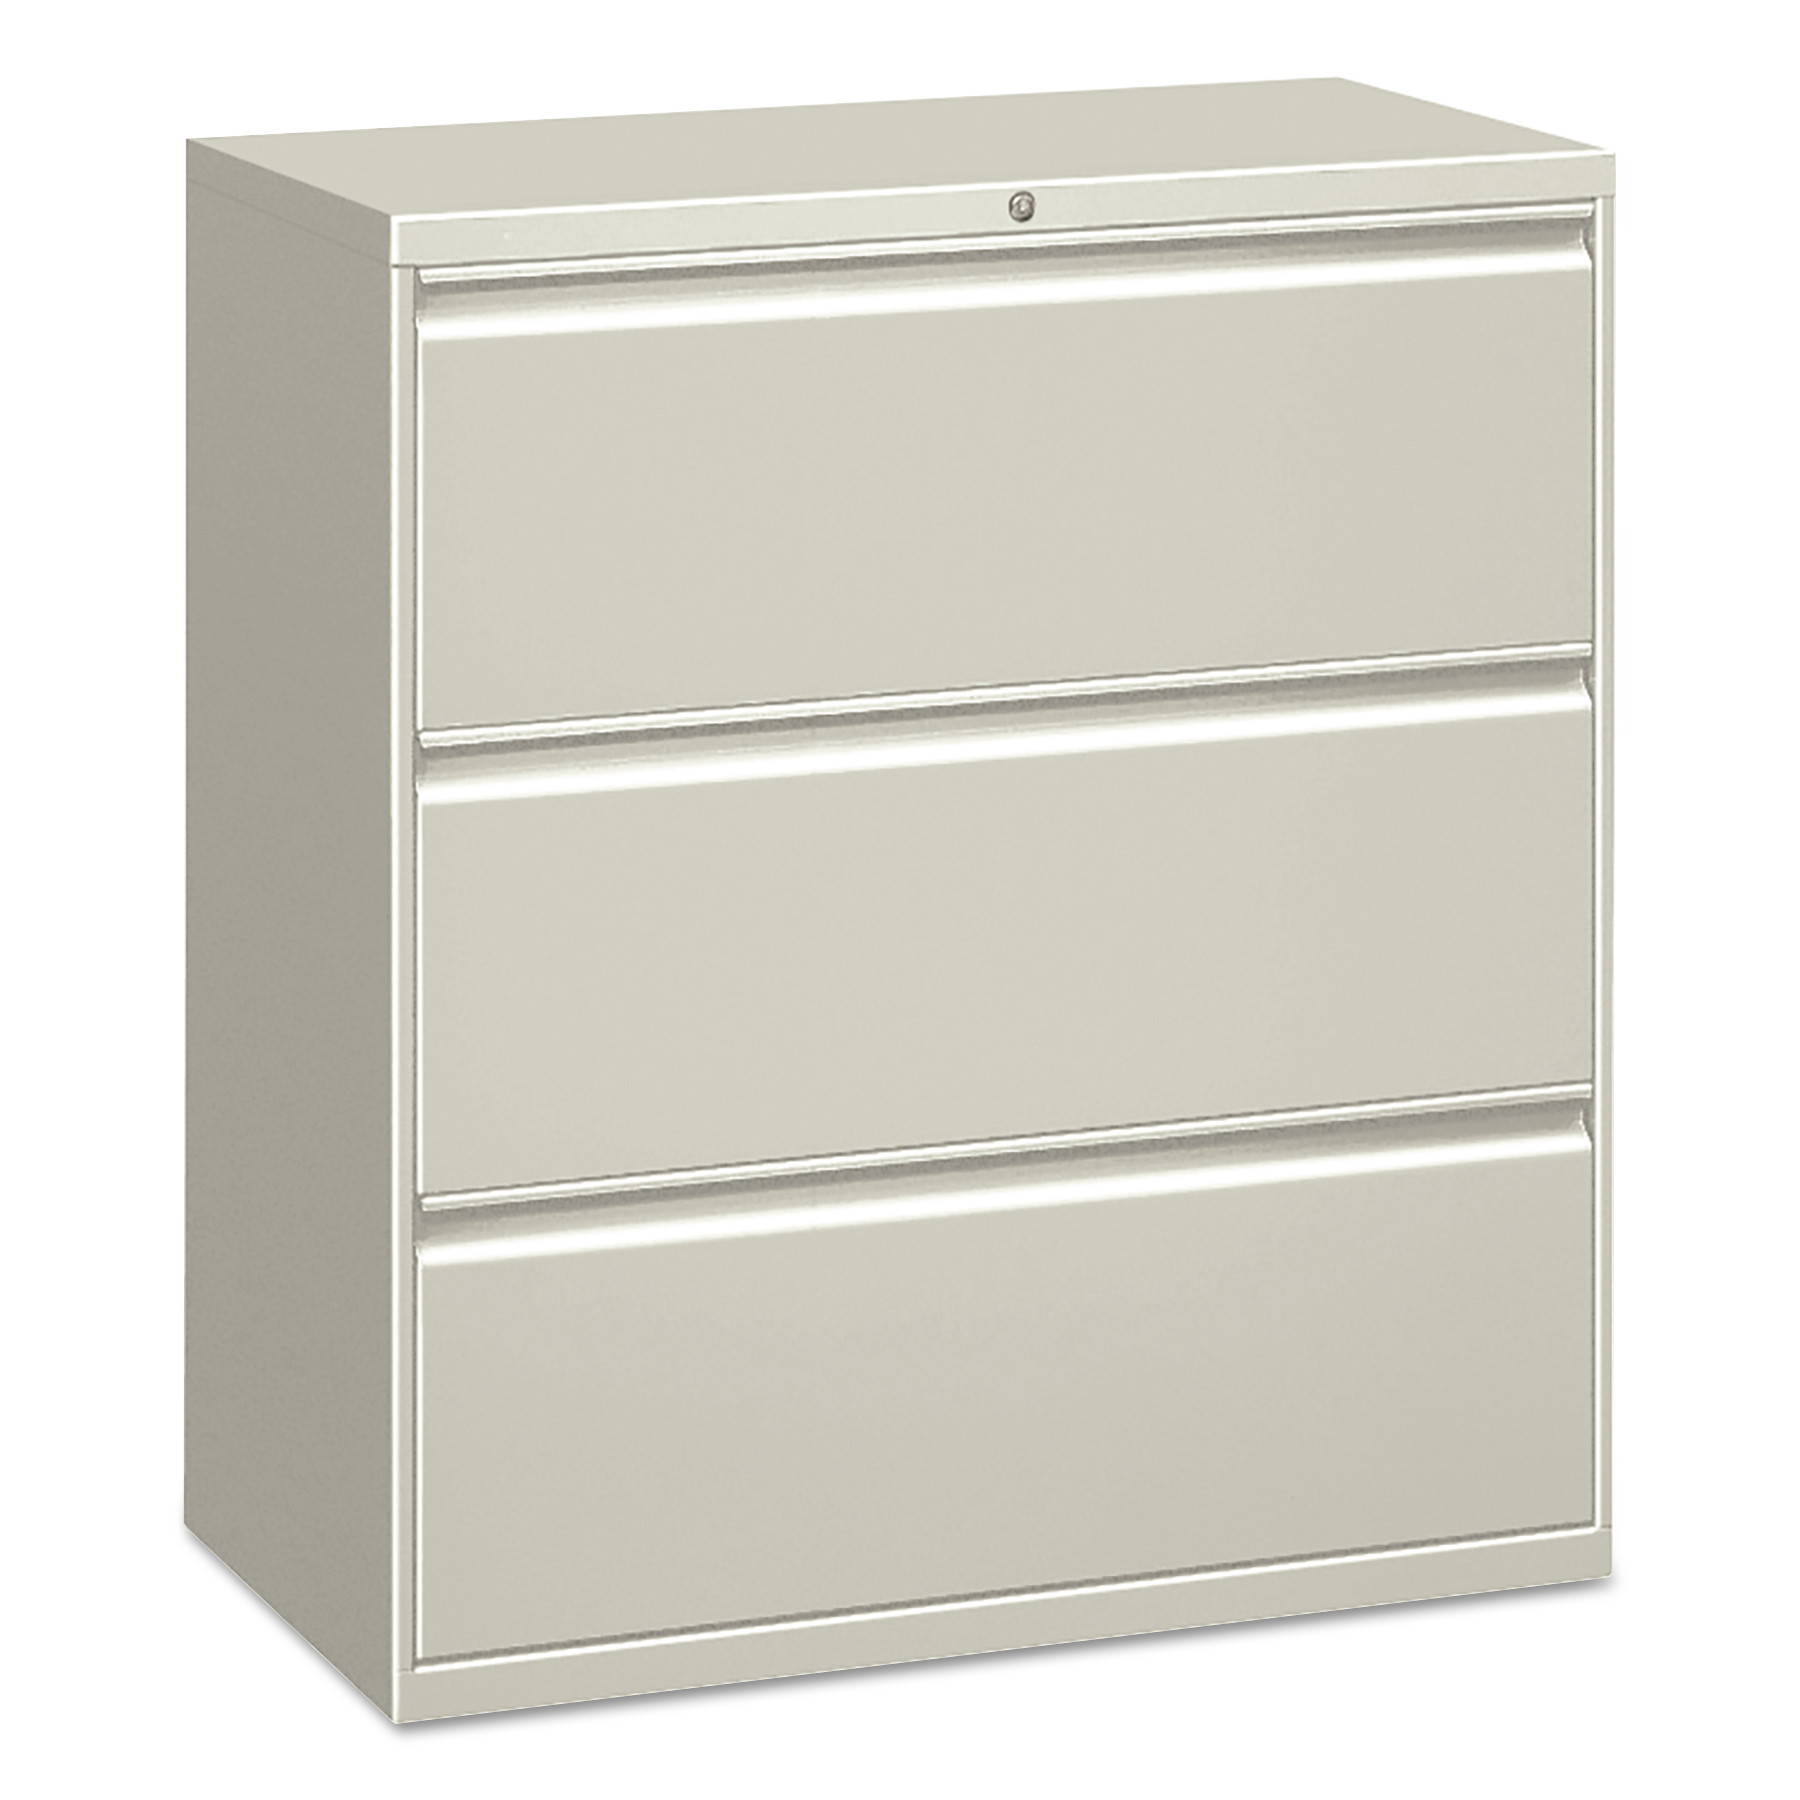 Alera ALELF3041LG Three-Drawer Lateral File Cabinet - Light Gray - image 2 of 2